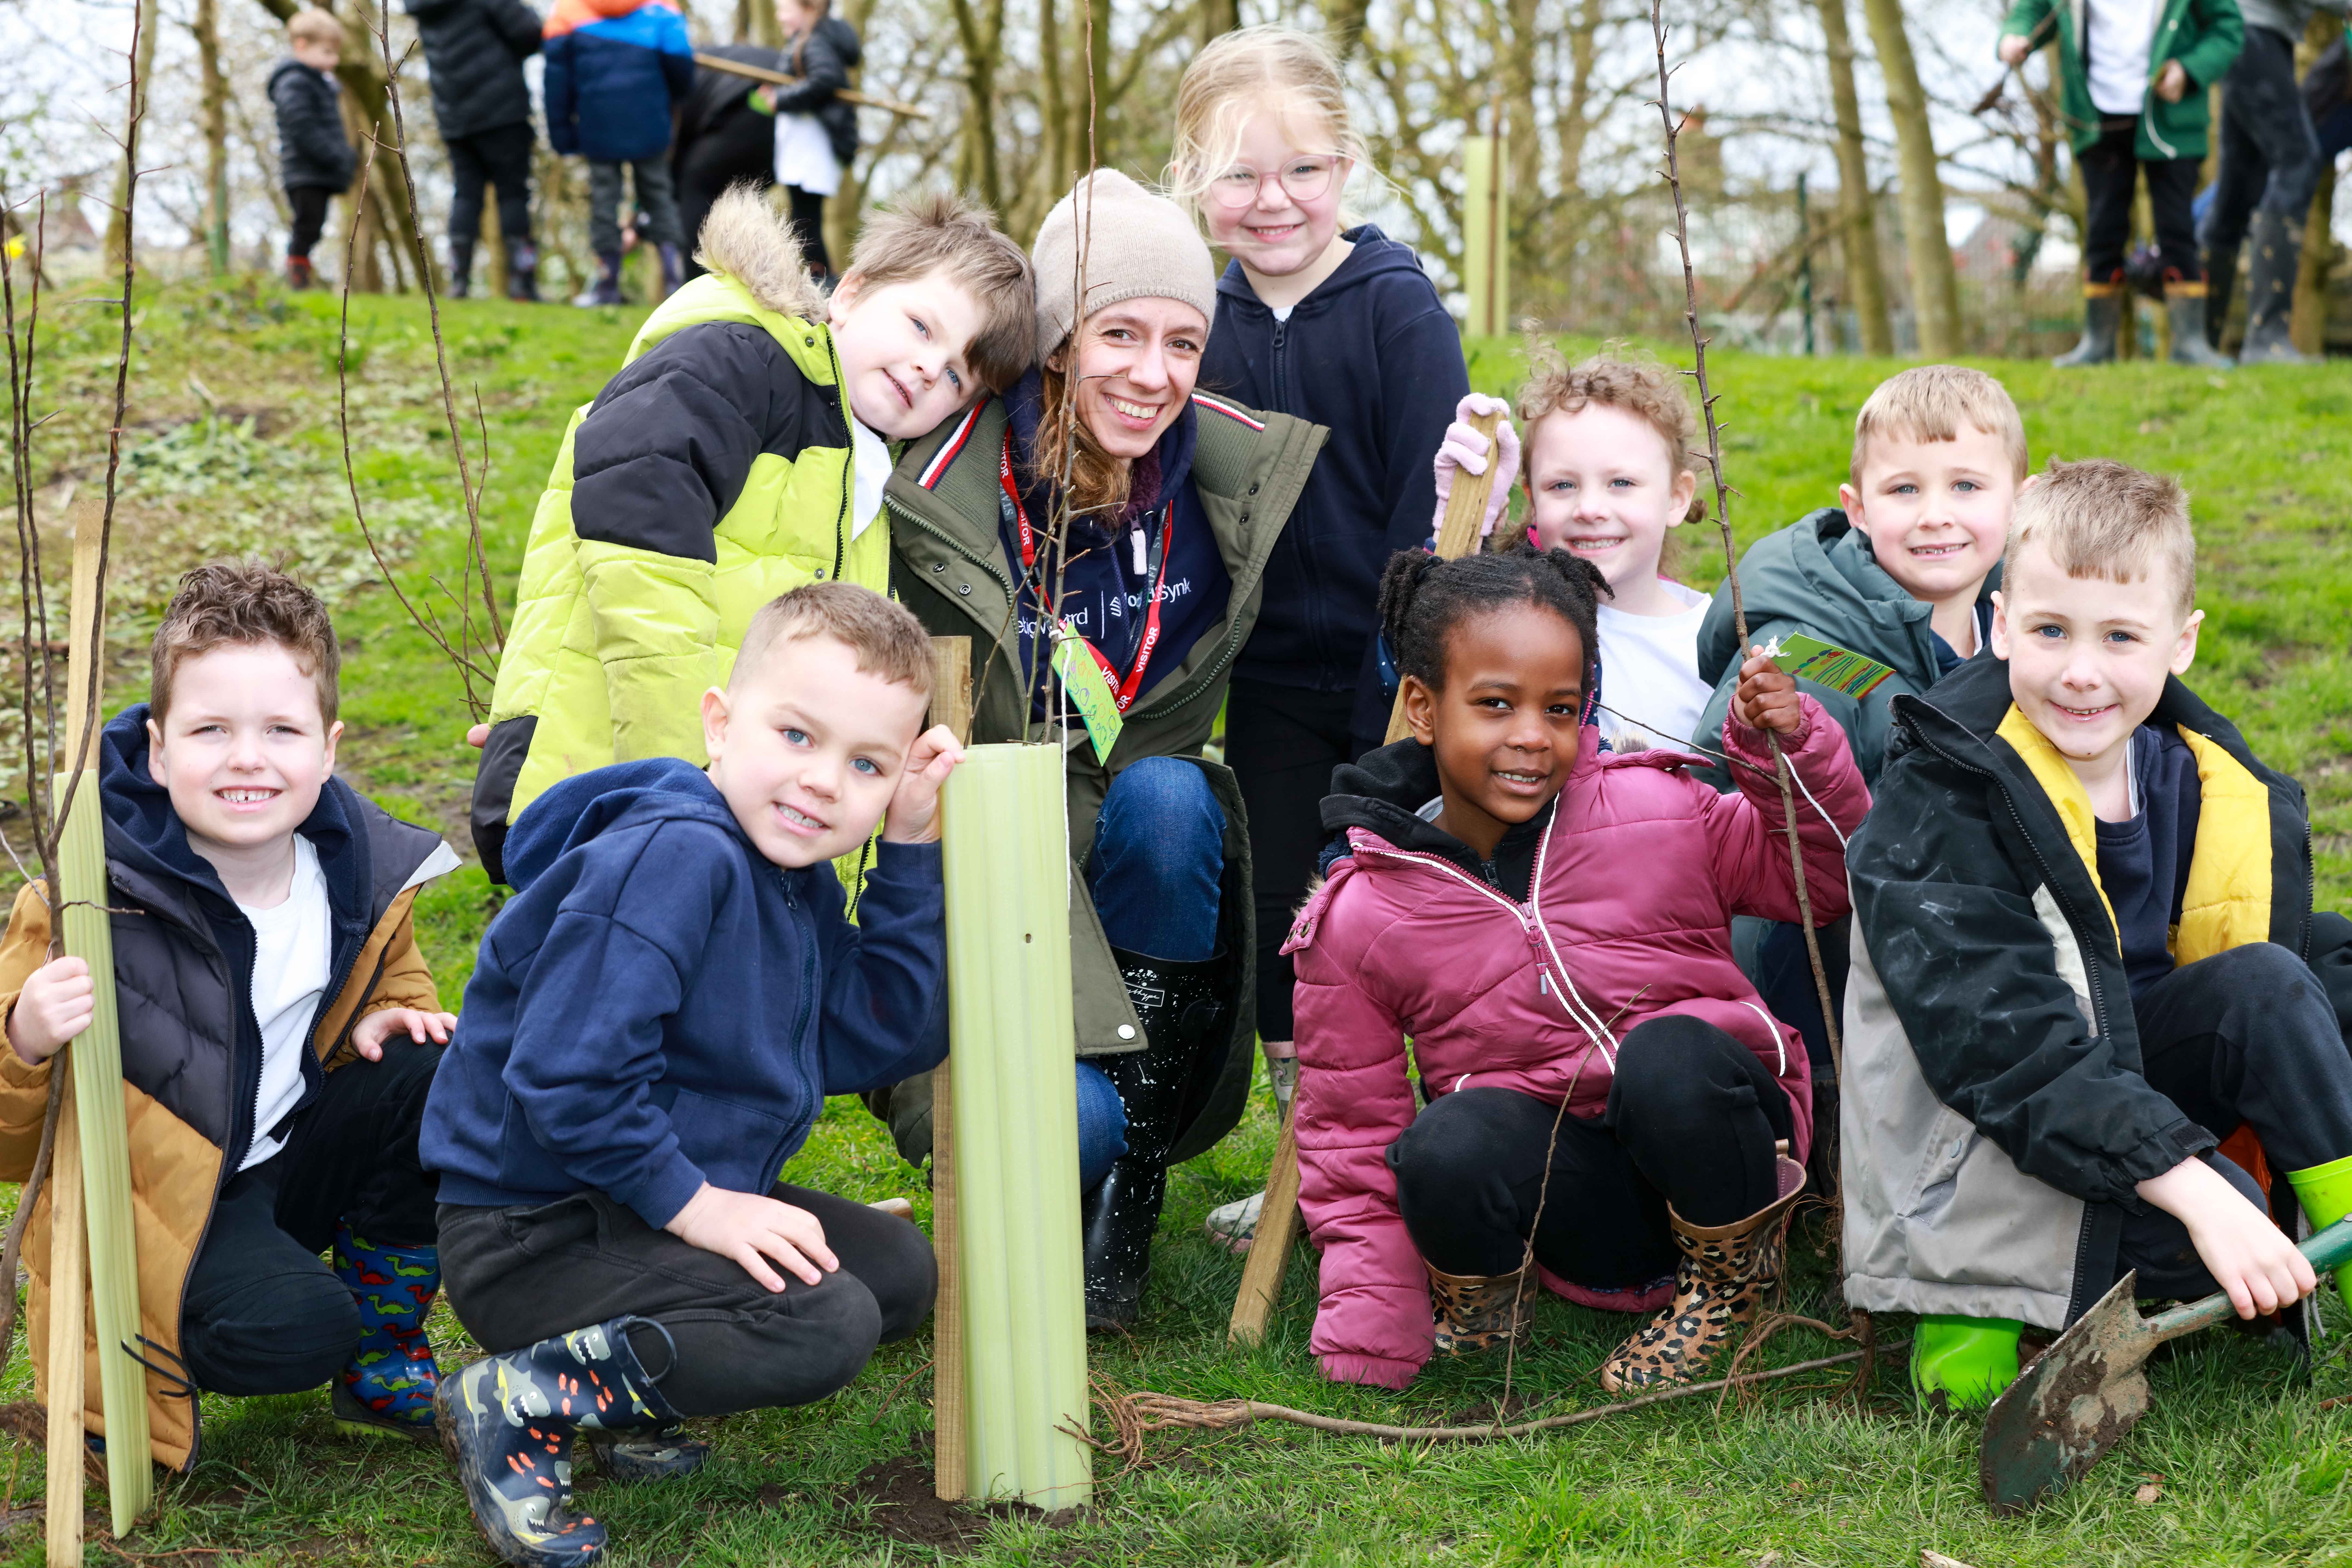 TheBigWord planting event at East Ardsley Primary Academy